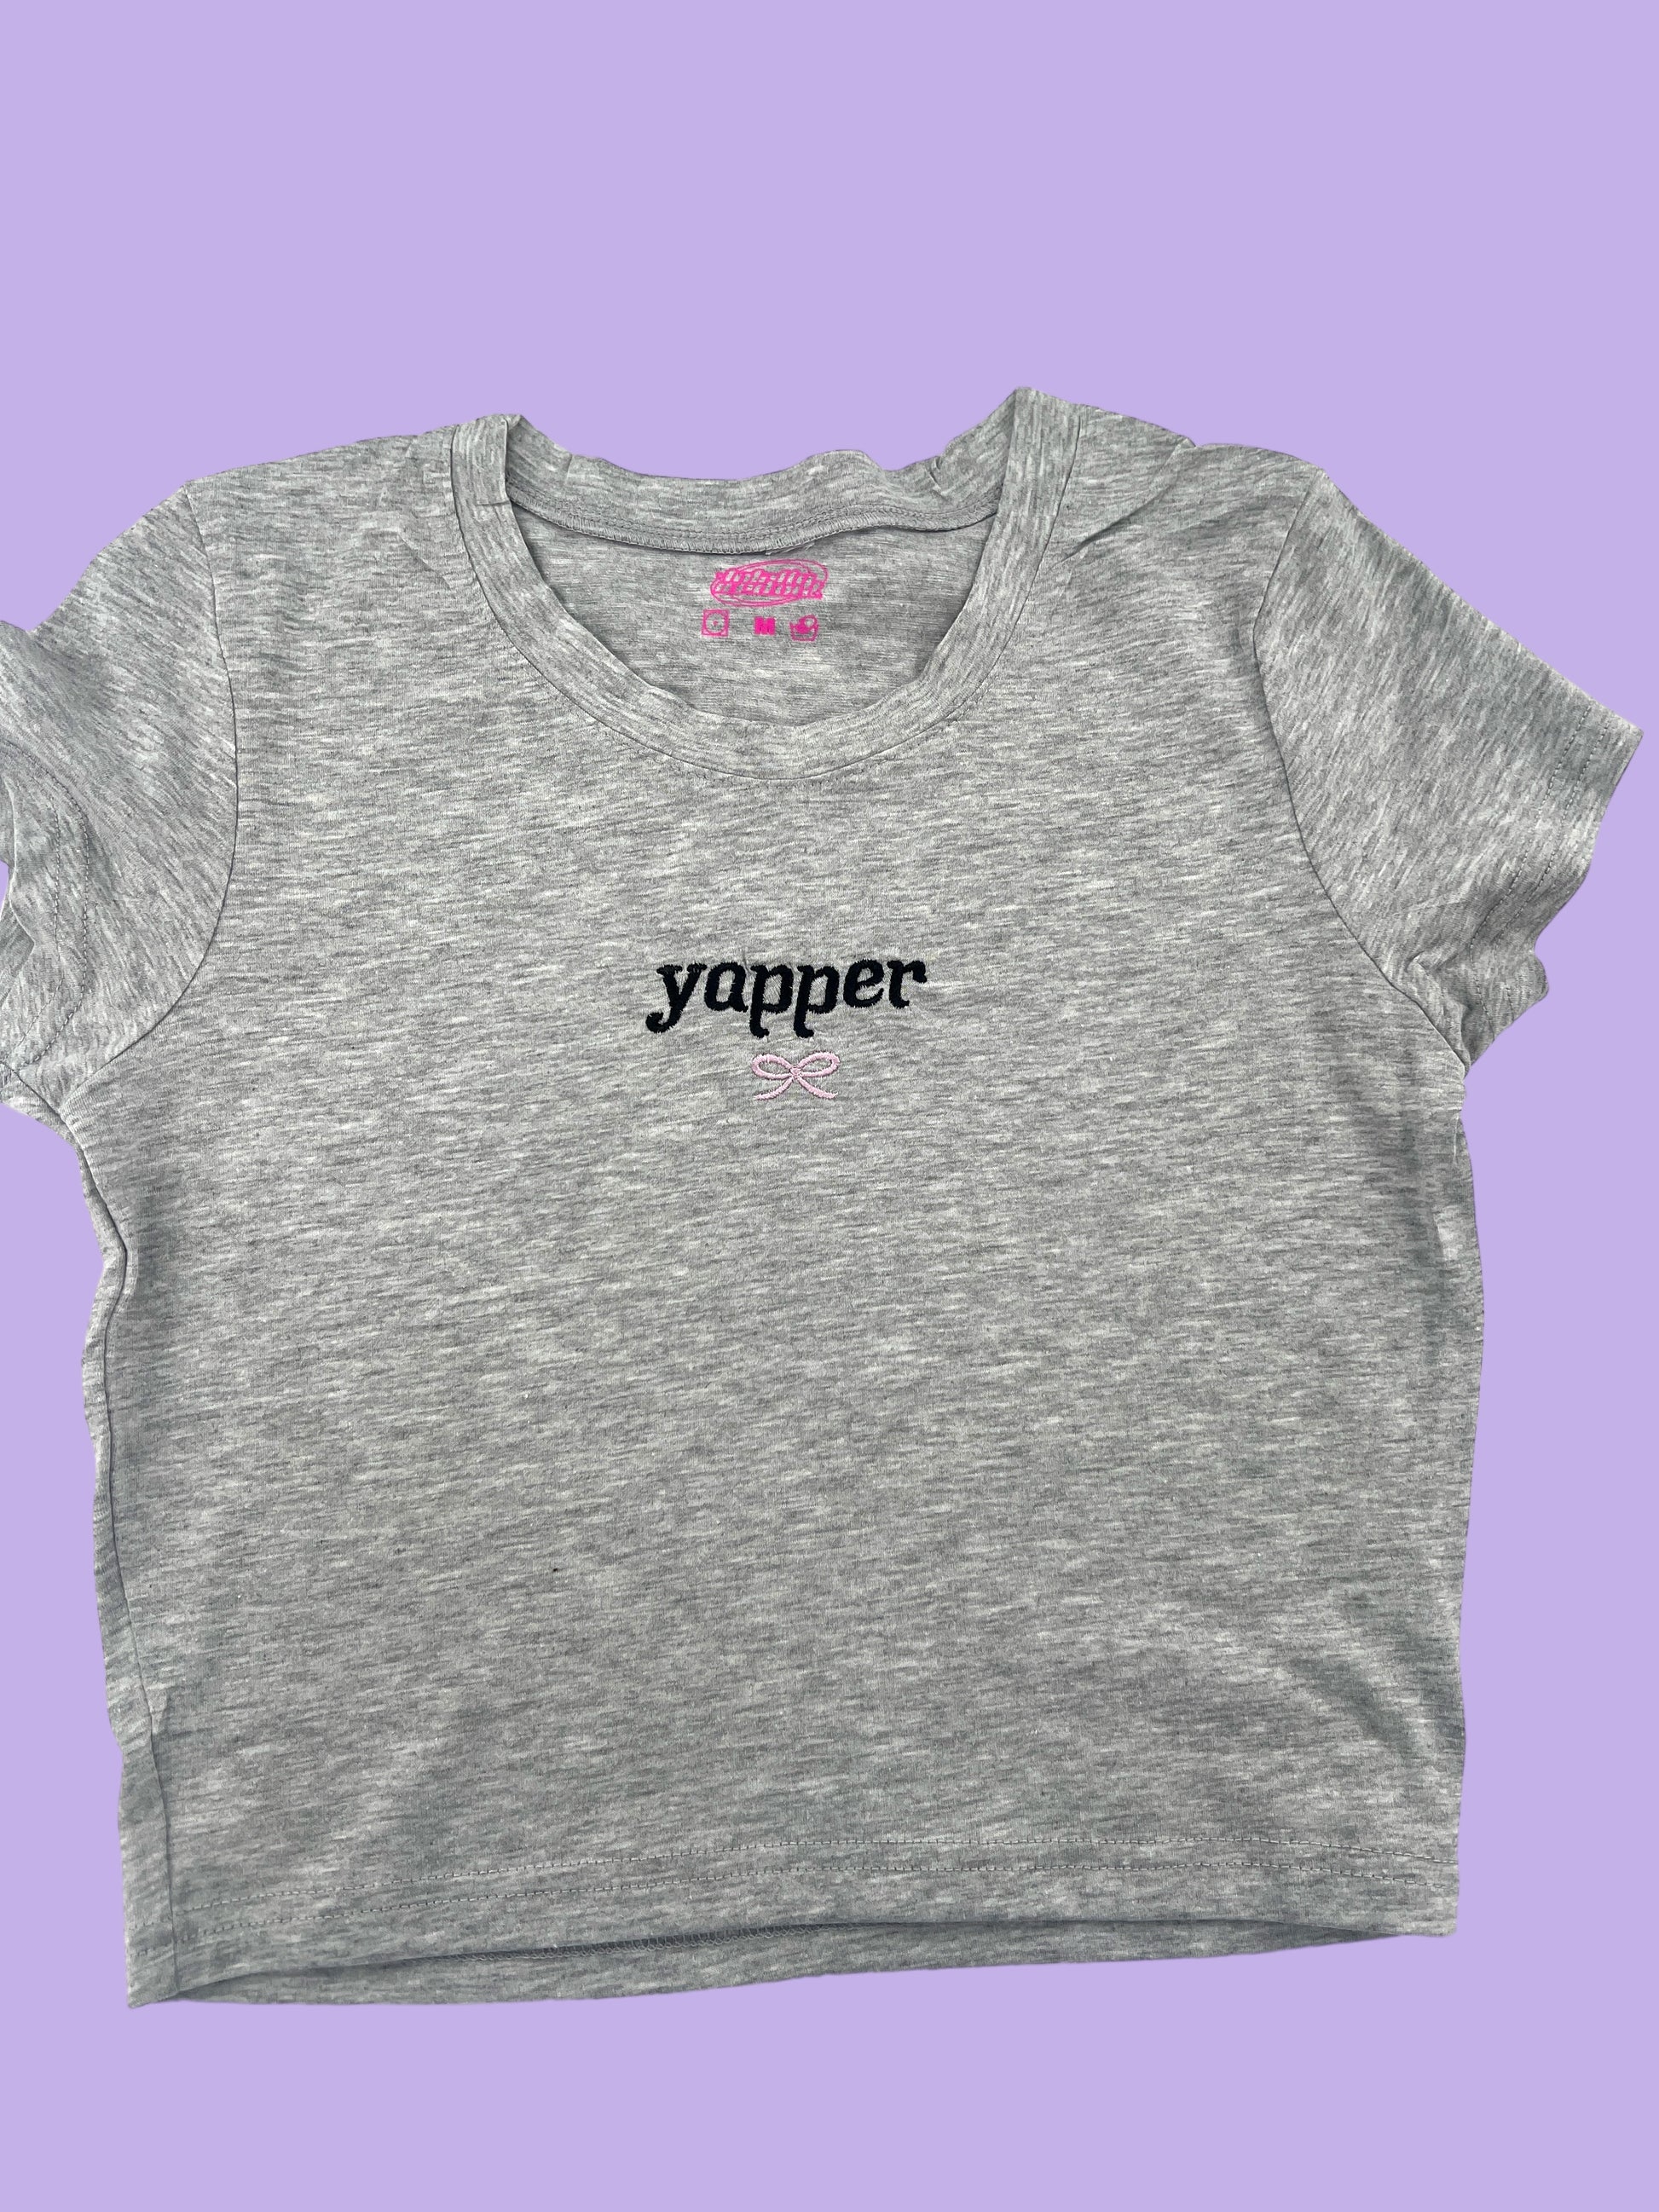 a t - shirt with the word yapper printed on it